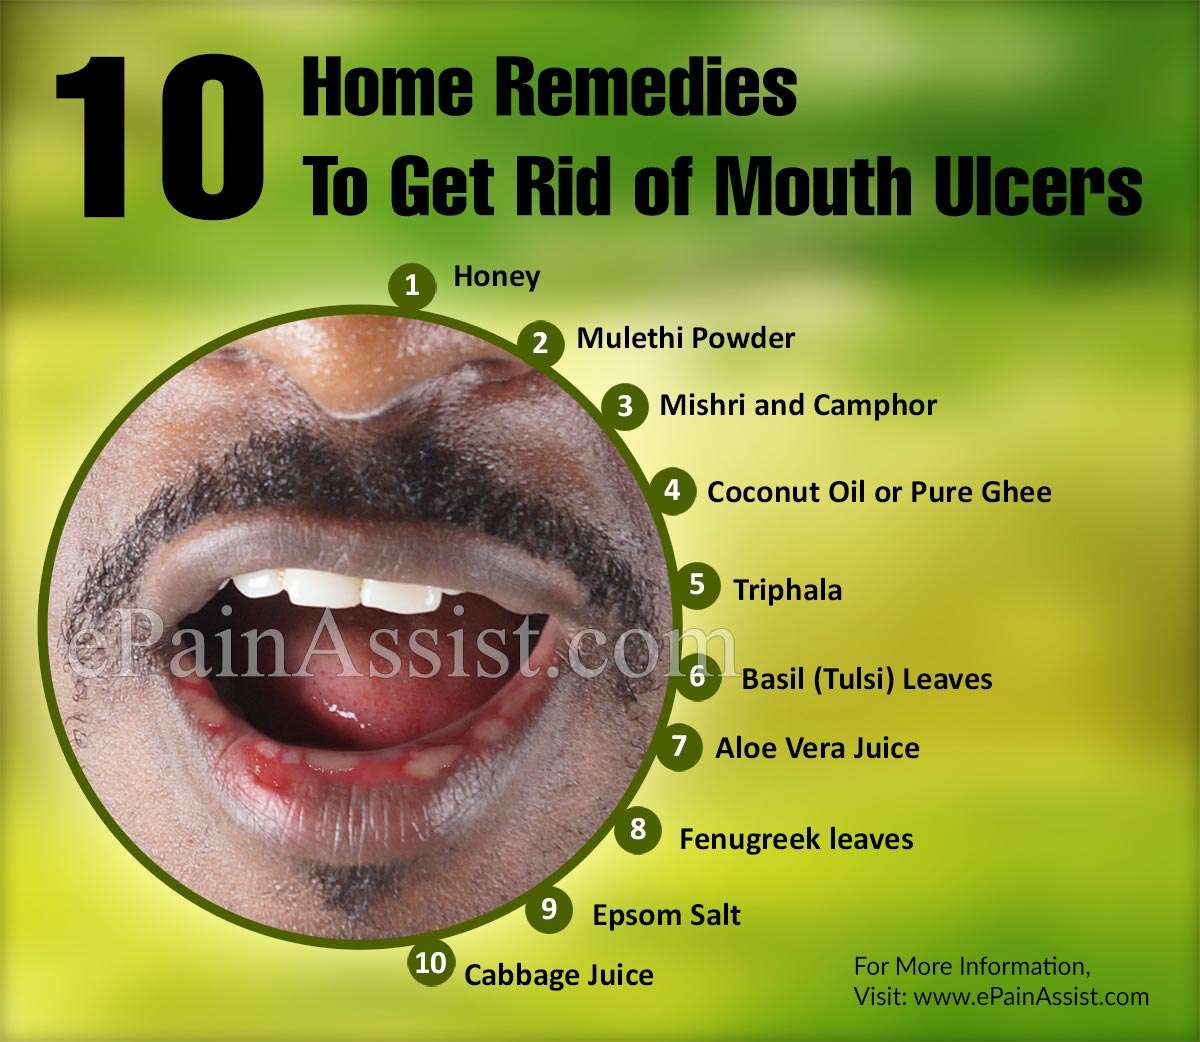 10 Simple Home Remedies To Get Rid Of Mouth Ulcers